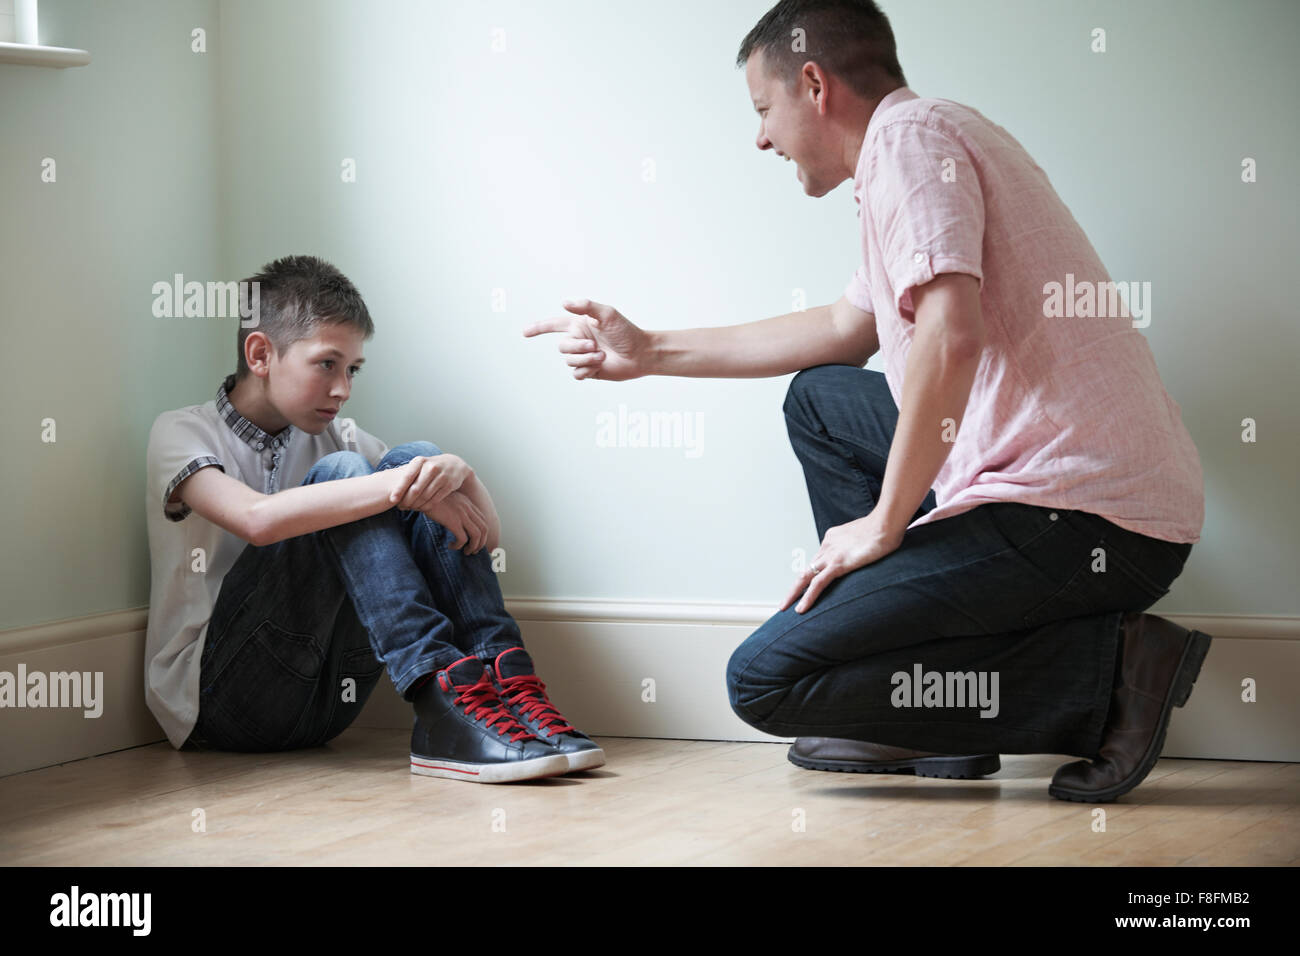 Father Being Physically Abusive Towards Son Stock Photo